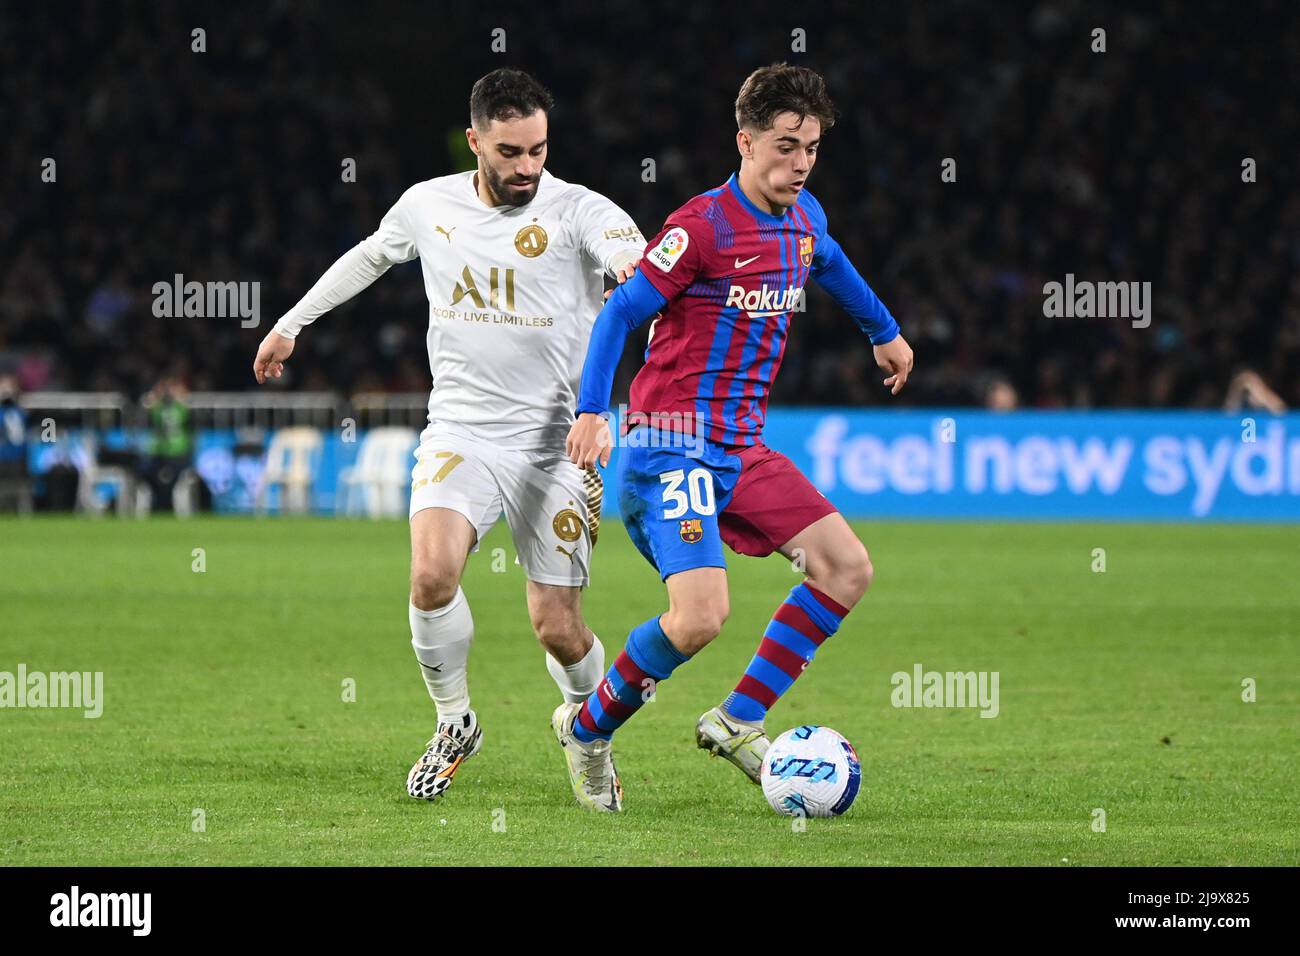 Sydney Olympic Park, Australia. 25th May, 2022. Anthony Caceres (L) of A-Leagues All Stars team and Pablo Martín Páez Gavira (R) in action during the match between FC Barcelona and the A-League All Stars at Accor Stadium. (Final score; FC Barcelona 3:2 A-Leagues All Stars). Credit: SOPA Images Limited/Alamy Live News Stock Photo